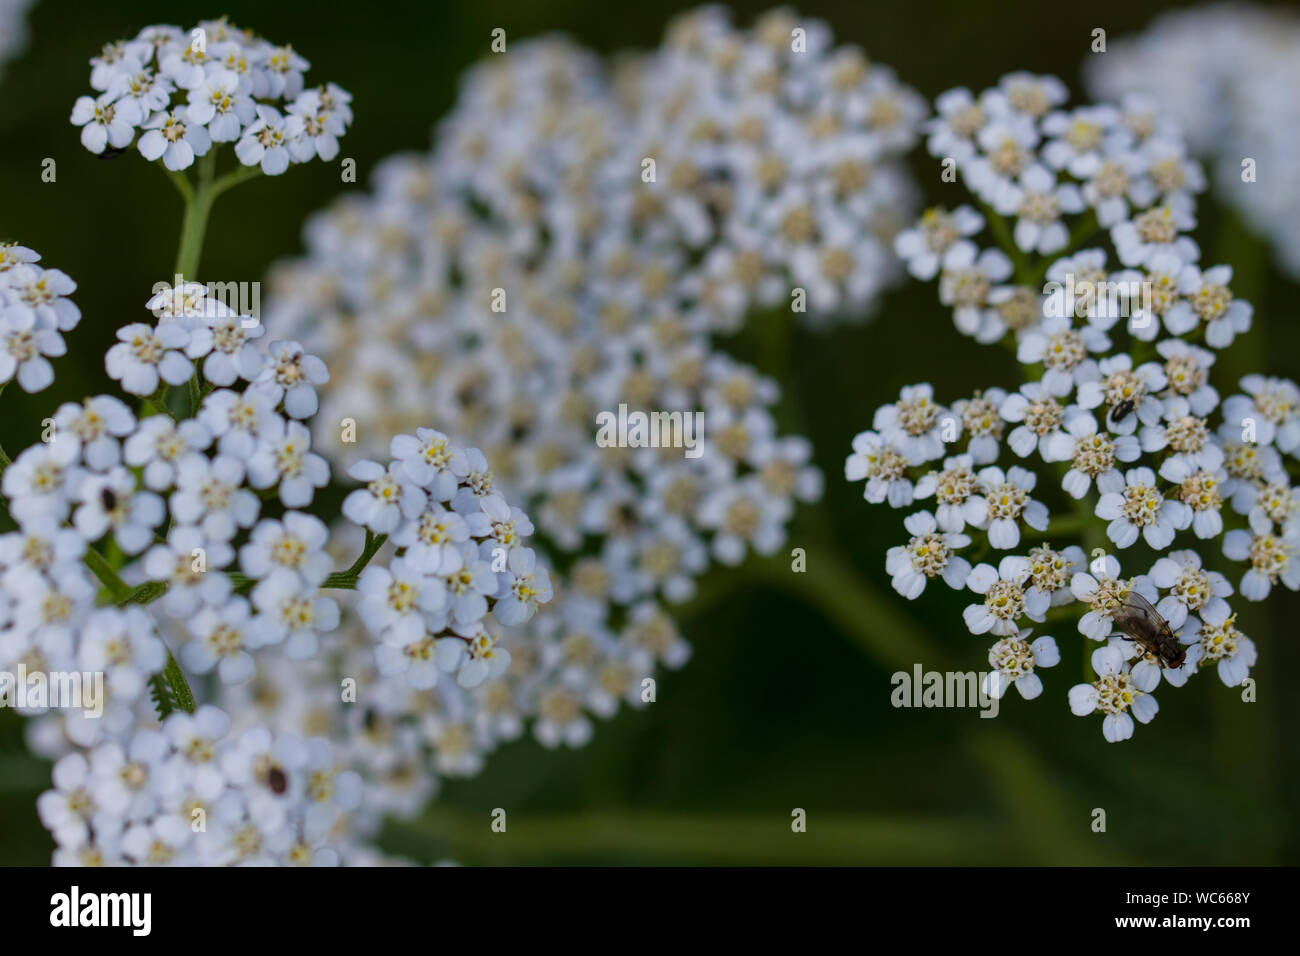 Yarrow Flowers Blooming Outdoors Stock Photo